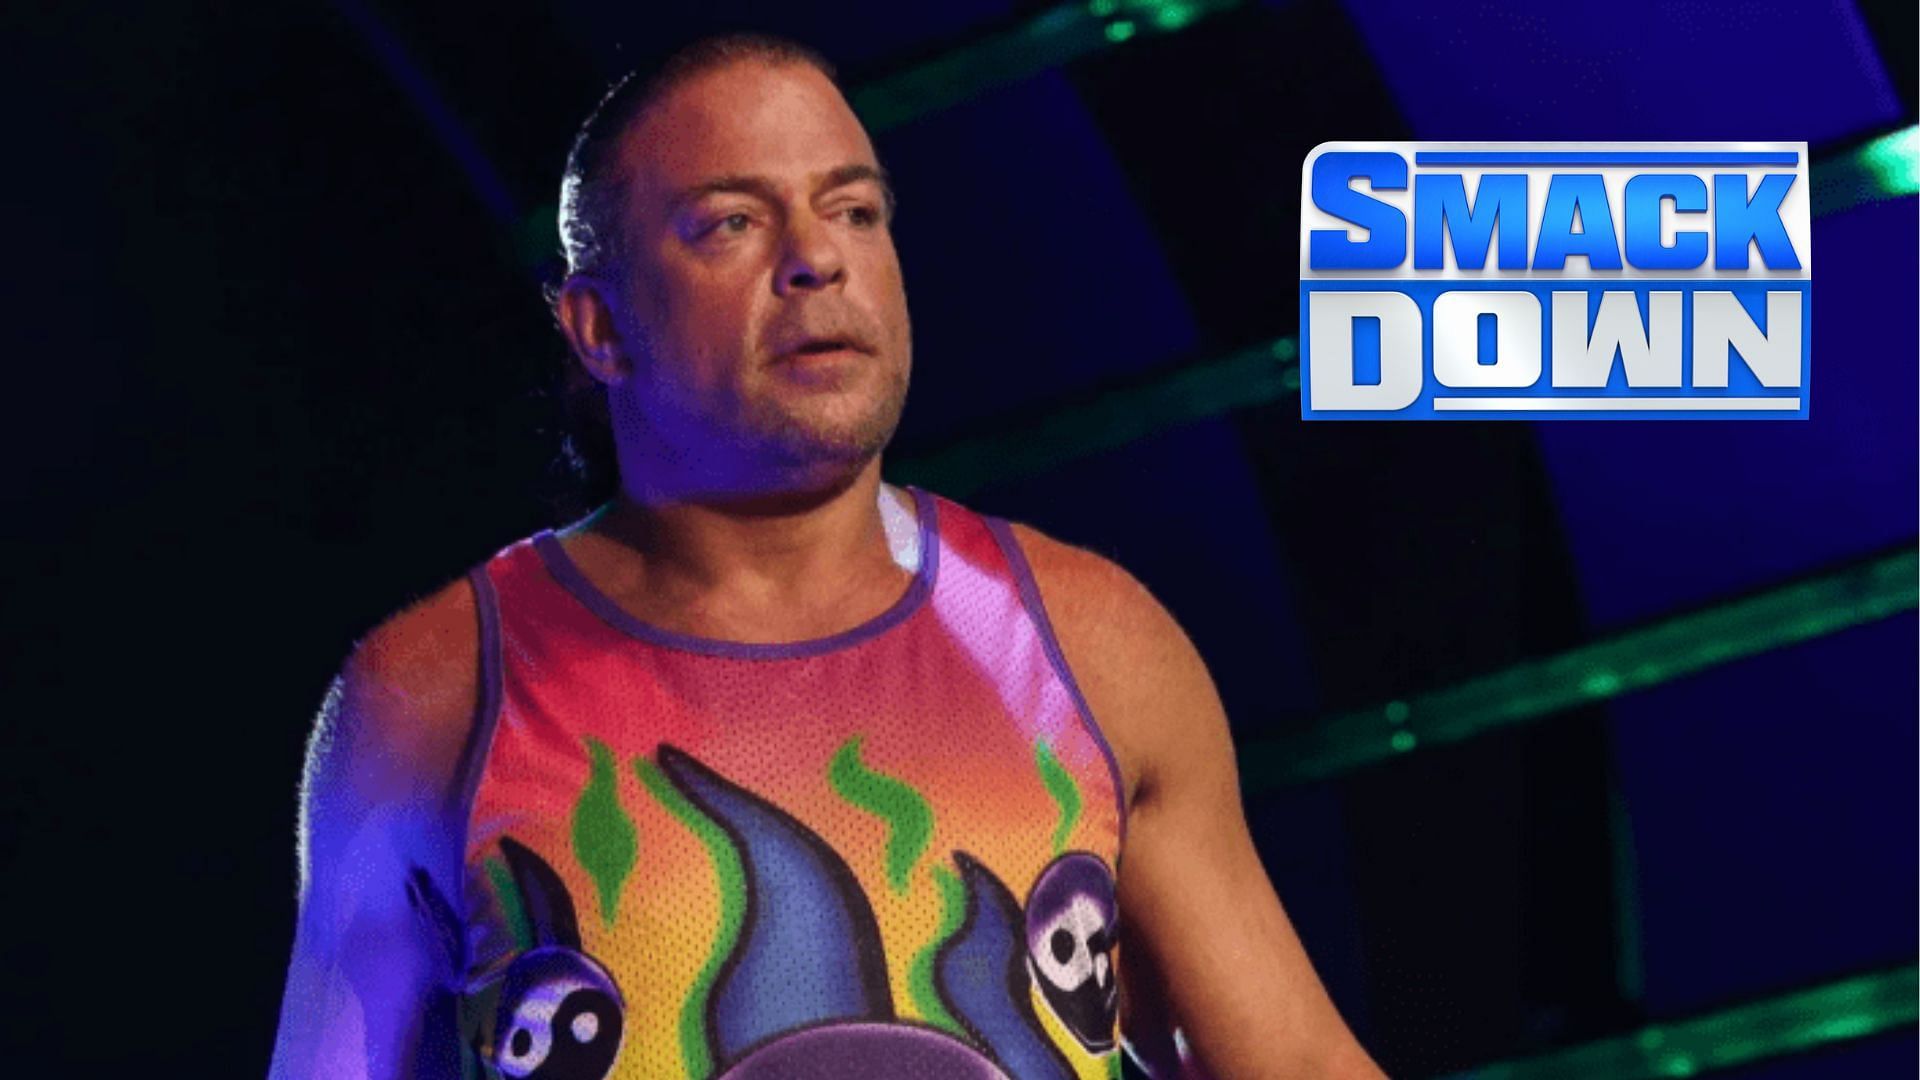 RVD made his AEW debut on Dynamite